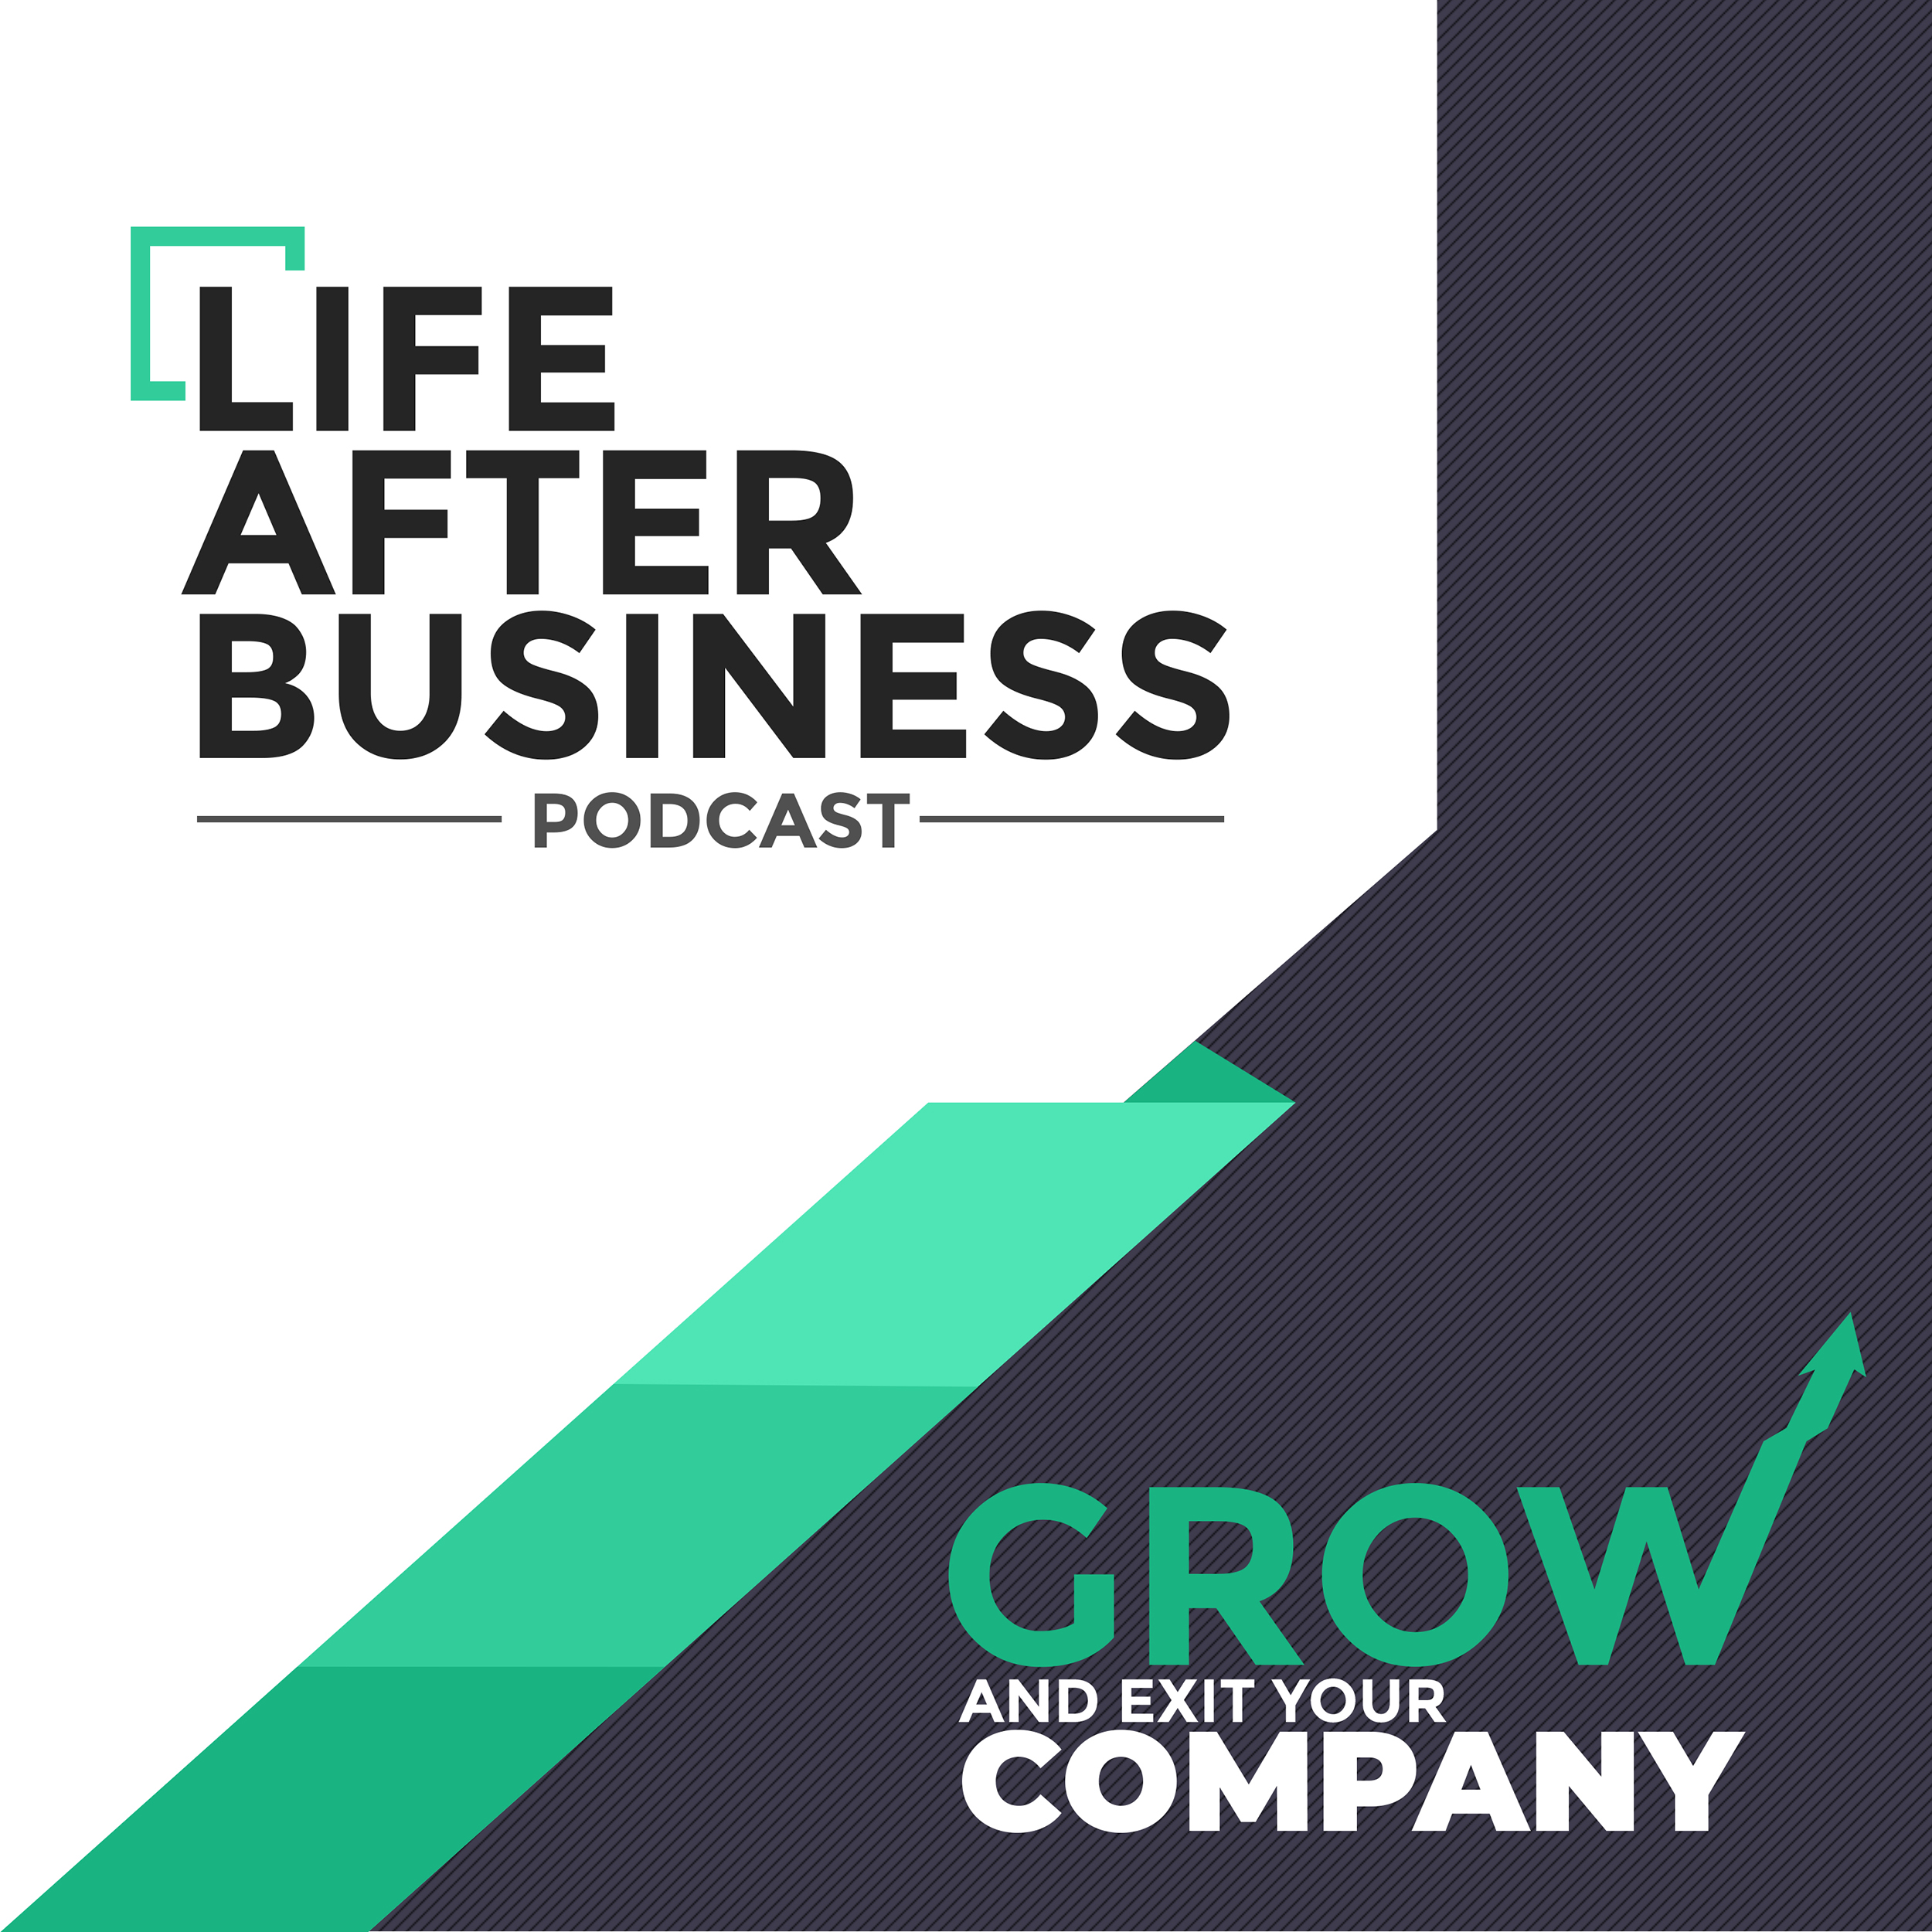 #122: Why You Should Sell The Family Business